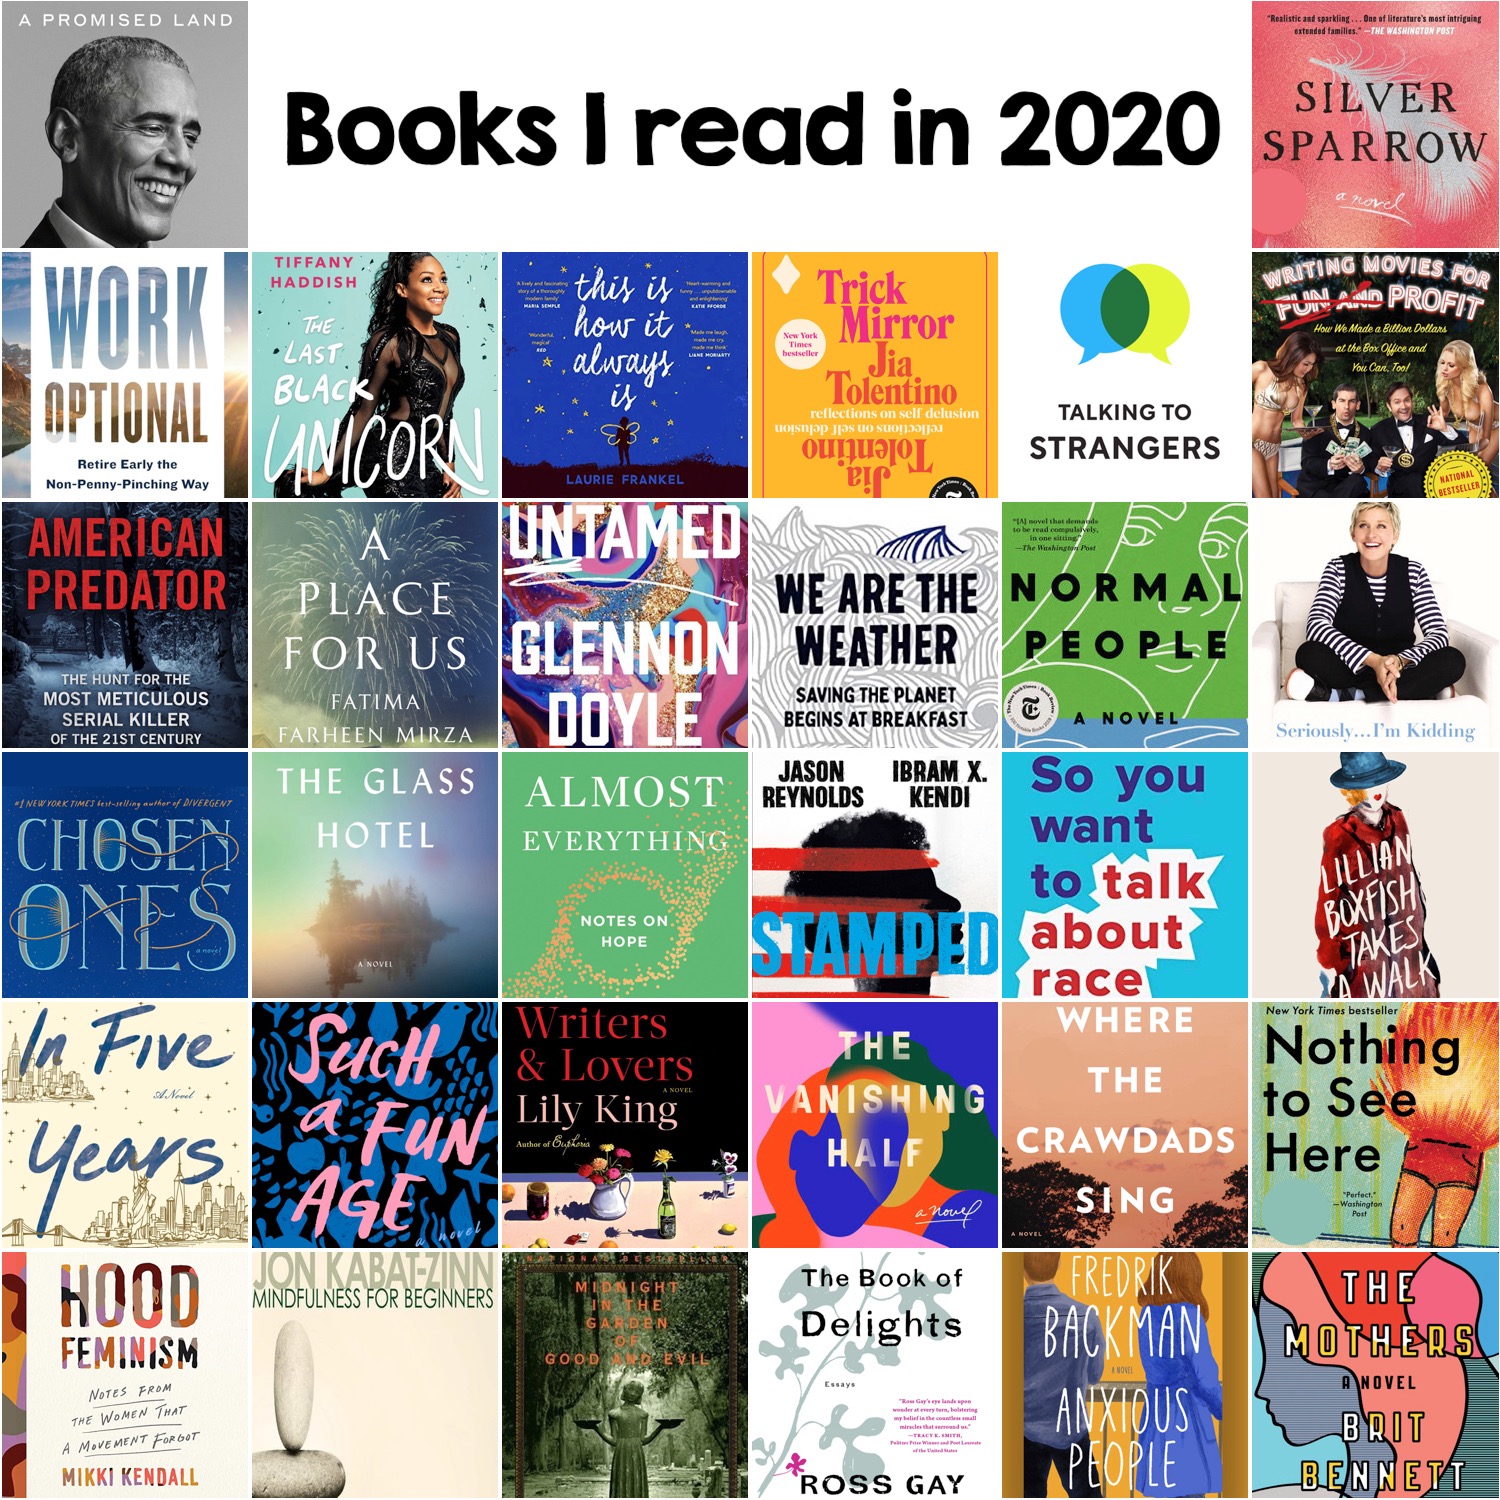 2020 books2 with banner.jpg